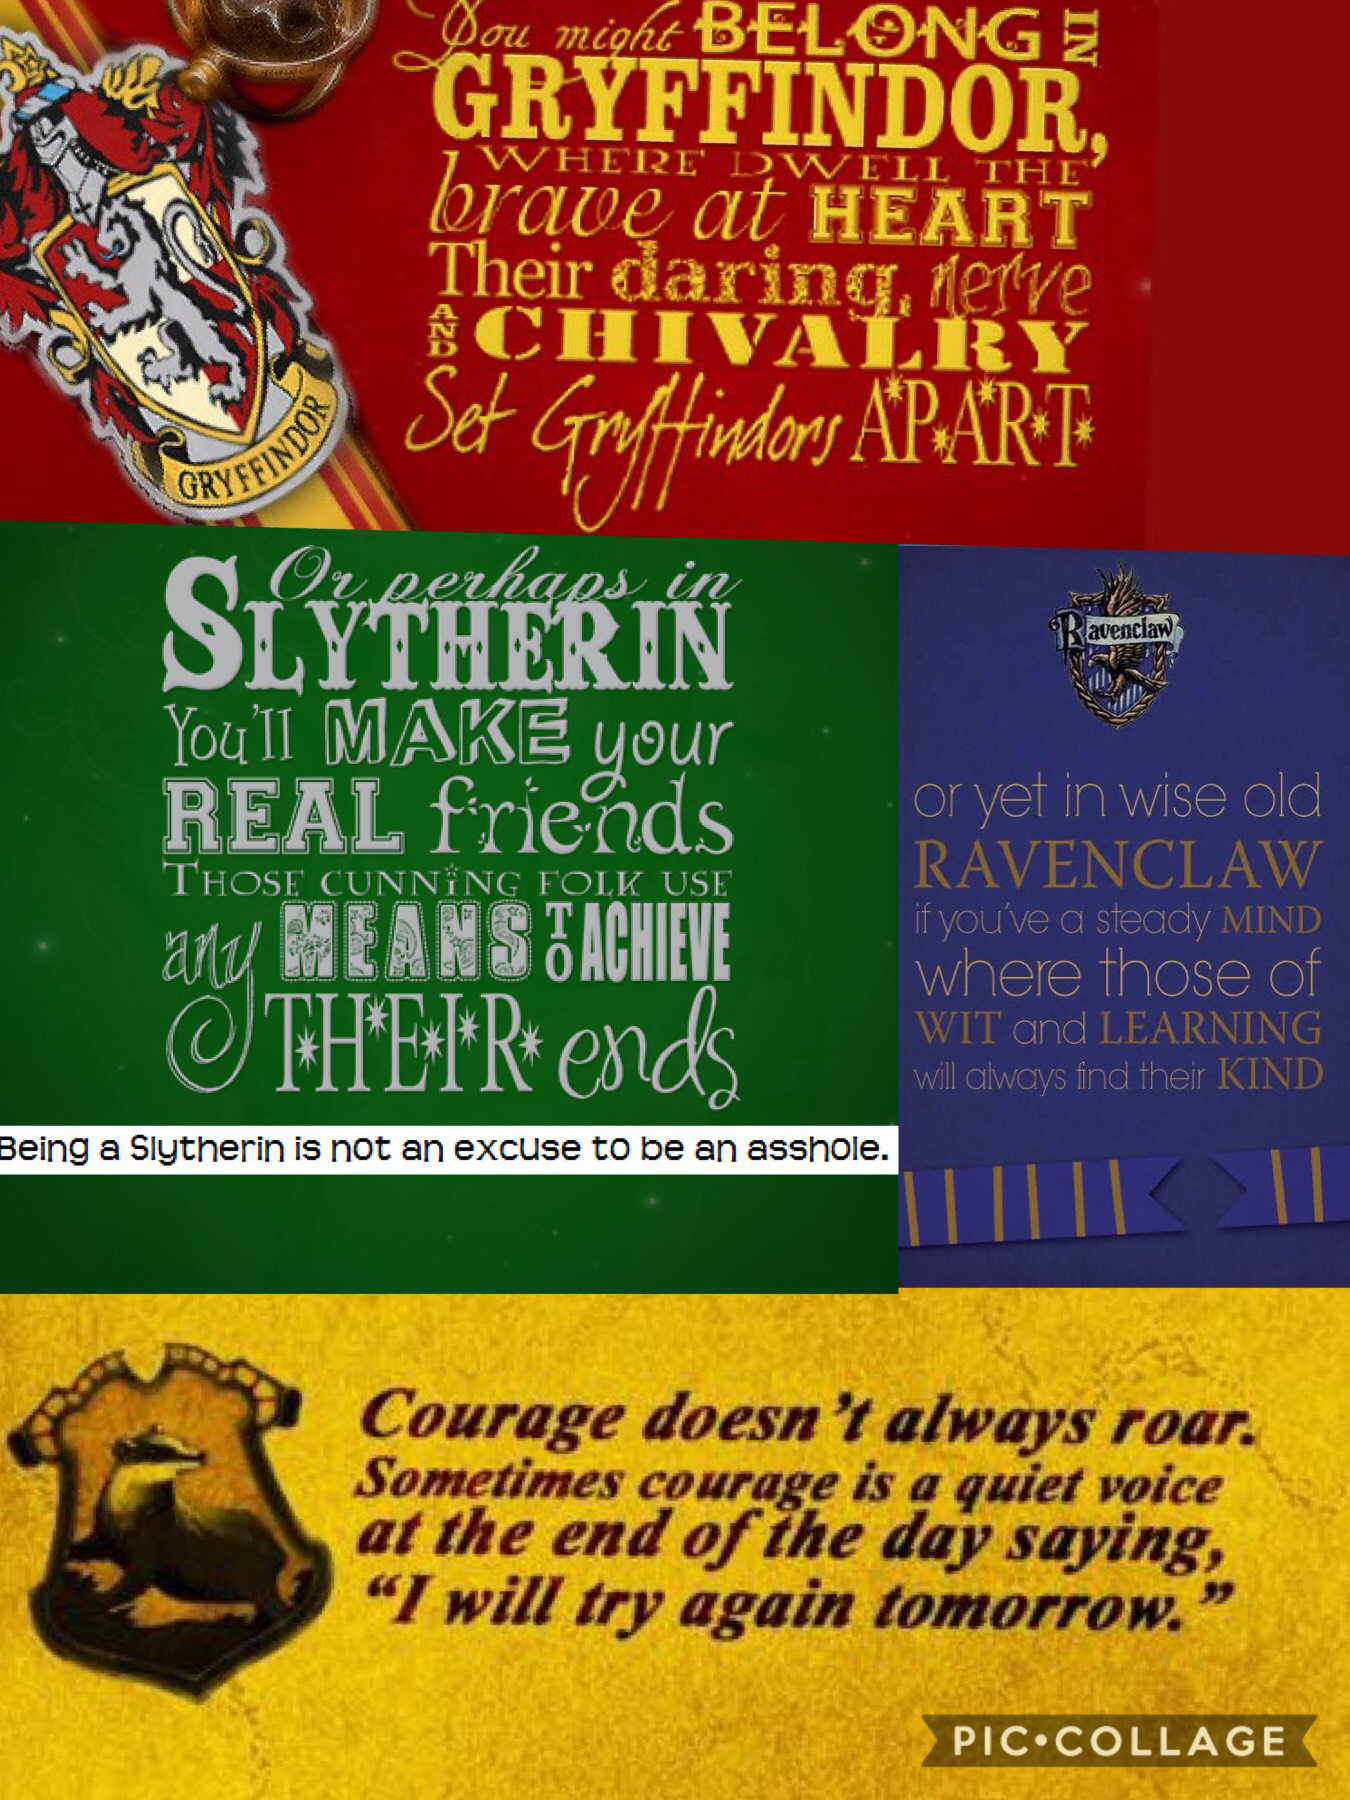 What is your Harry Potter house I am a griffindor.